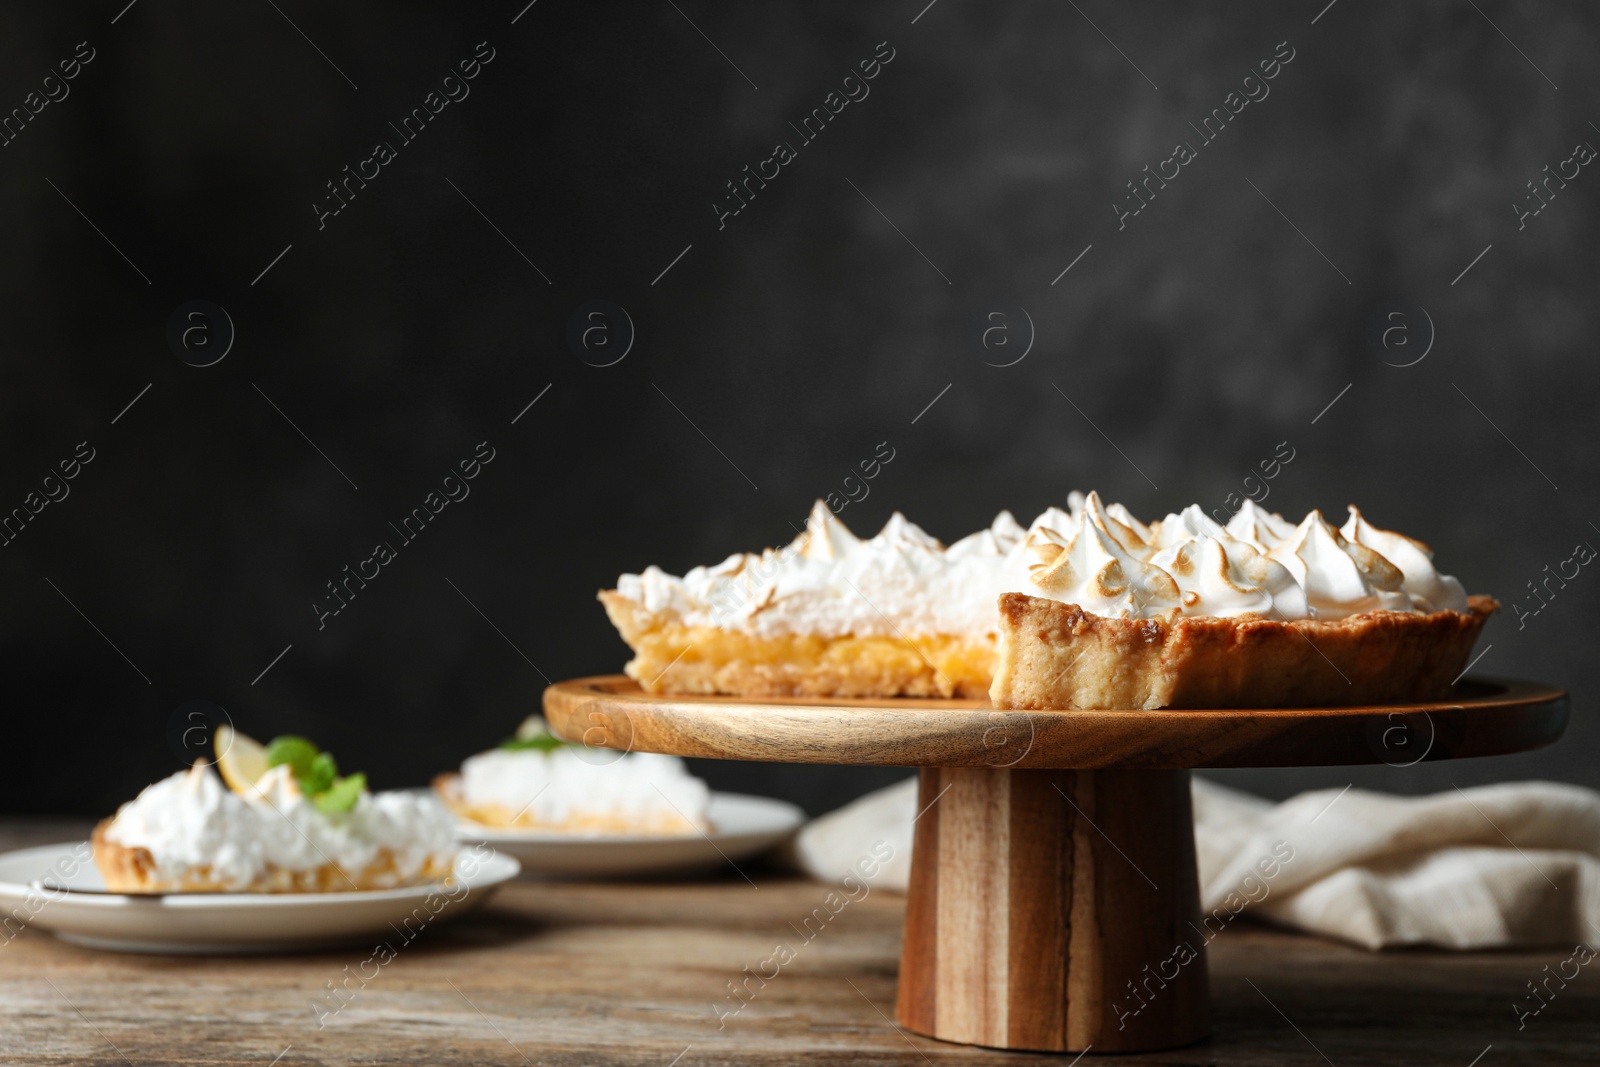 Photo of Stand with delicious lemon meringue pie on wooden table, space for text